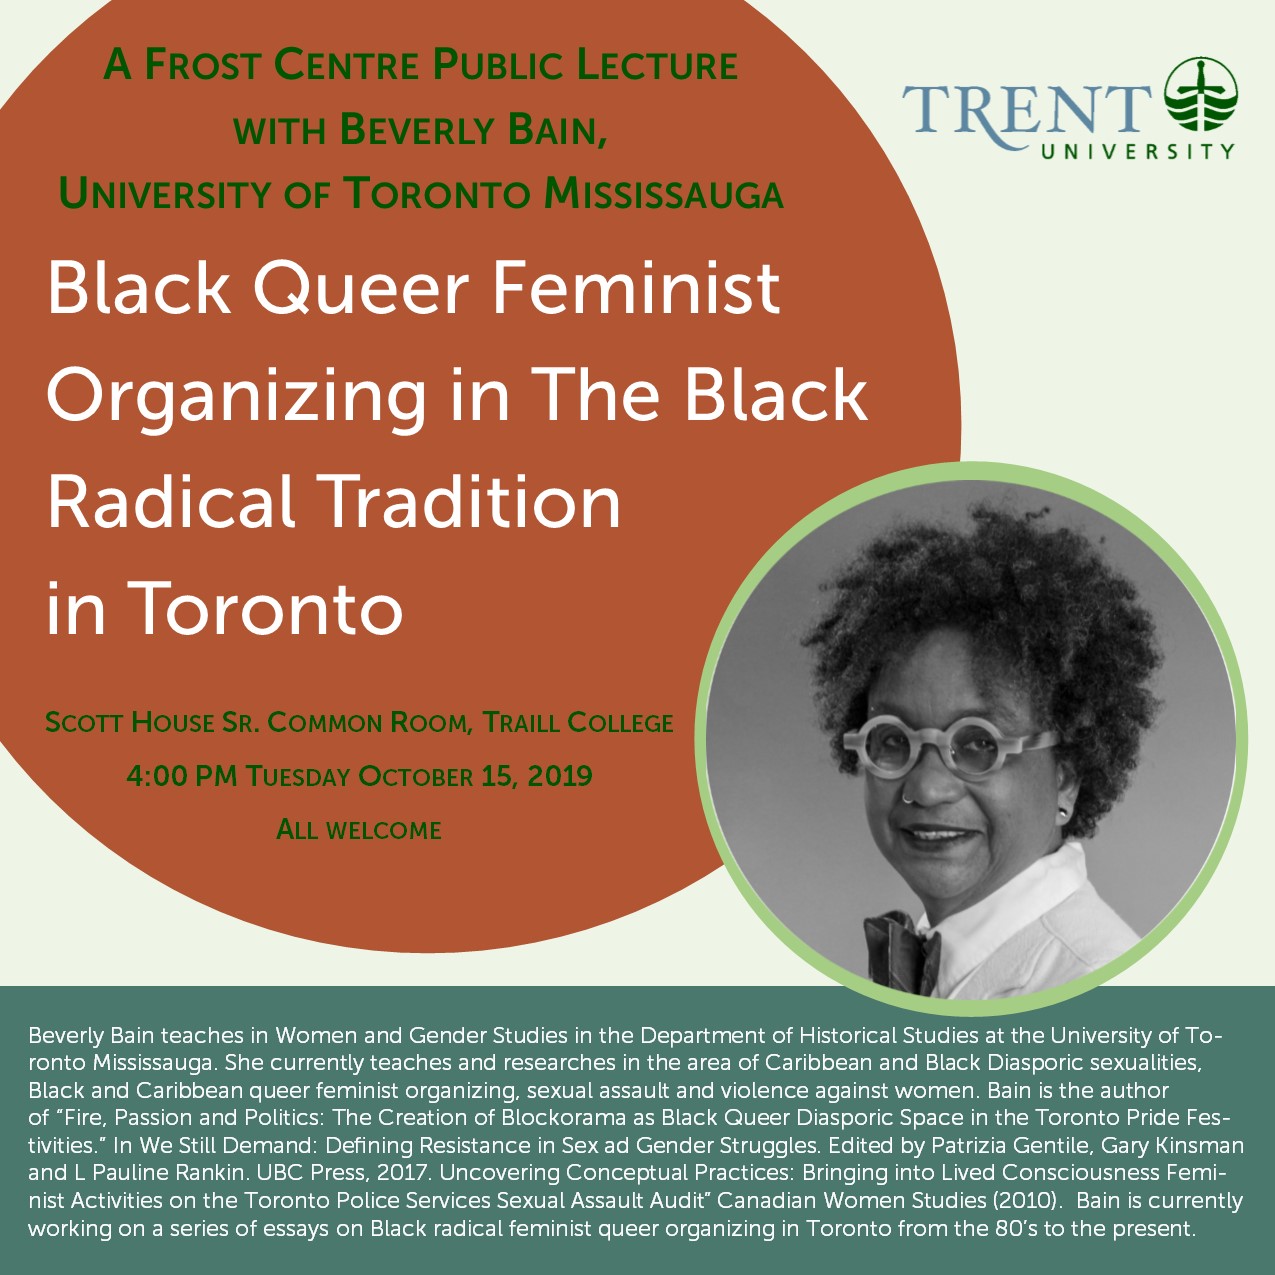 "Black Queer Feminist Organizing in the Black Radical Tradition in Toronto" with Beverly Bain 15 October 2019